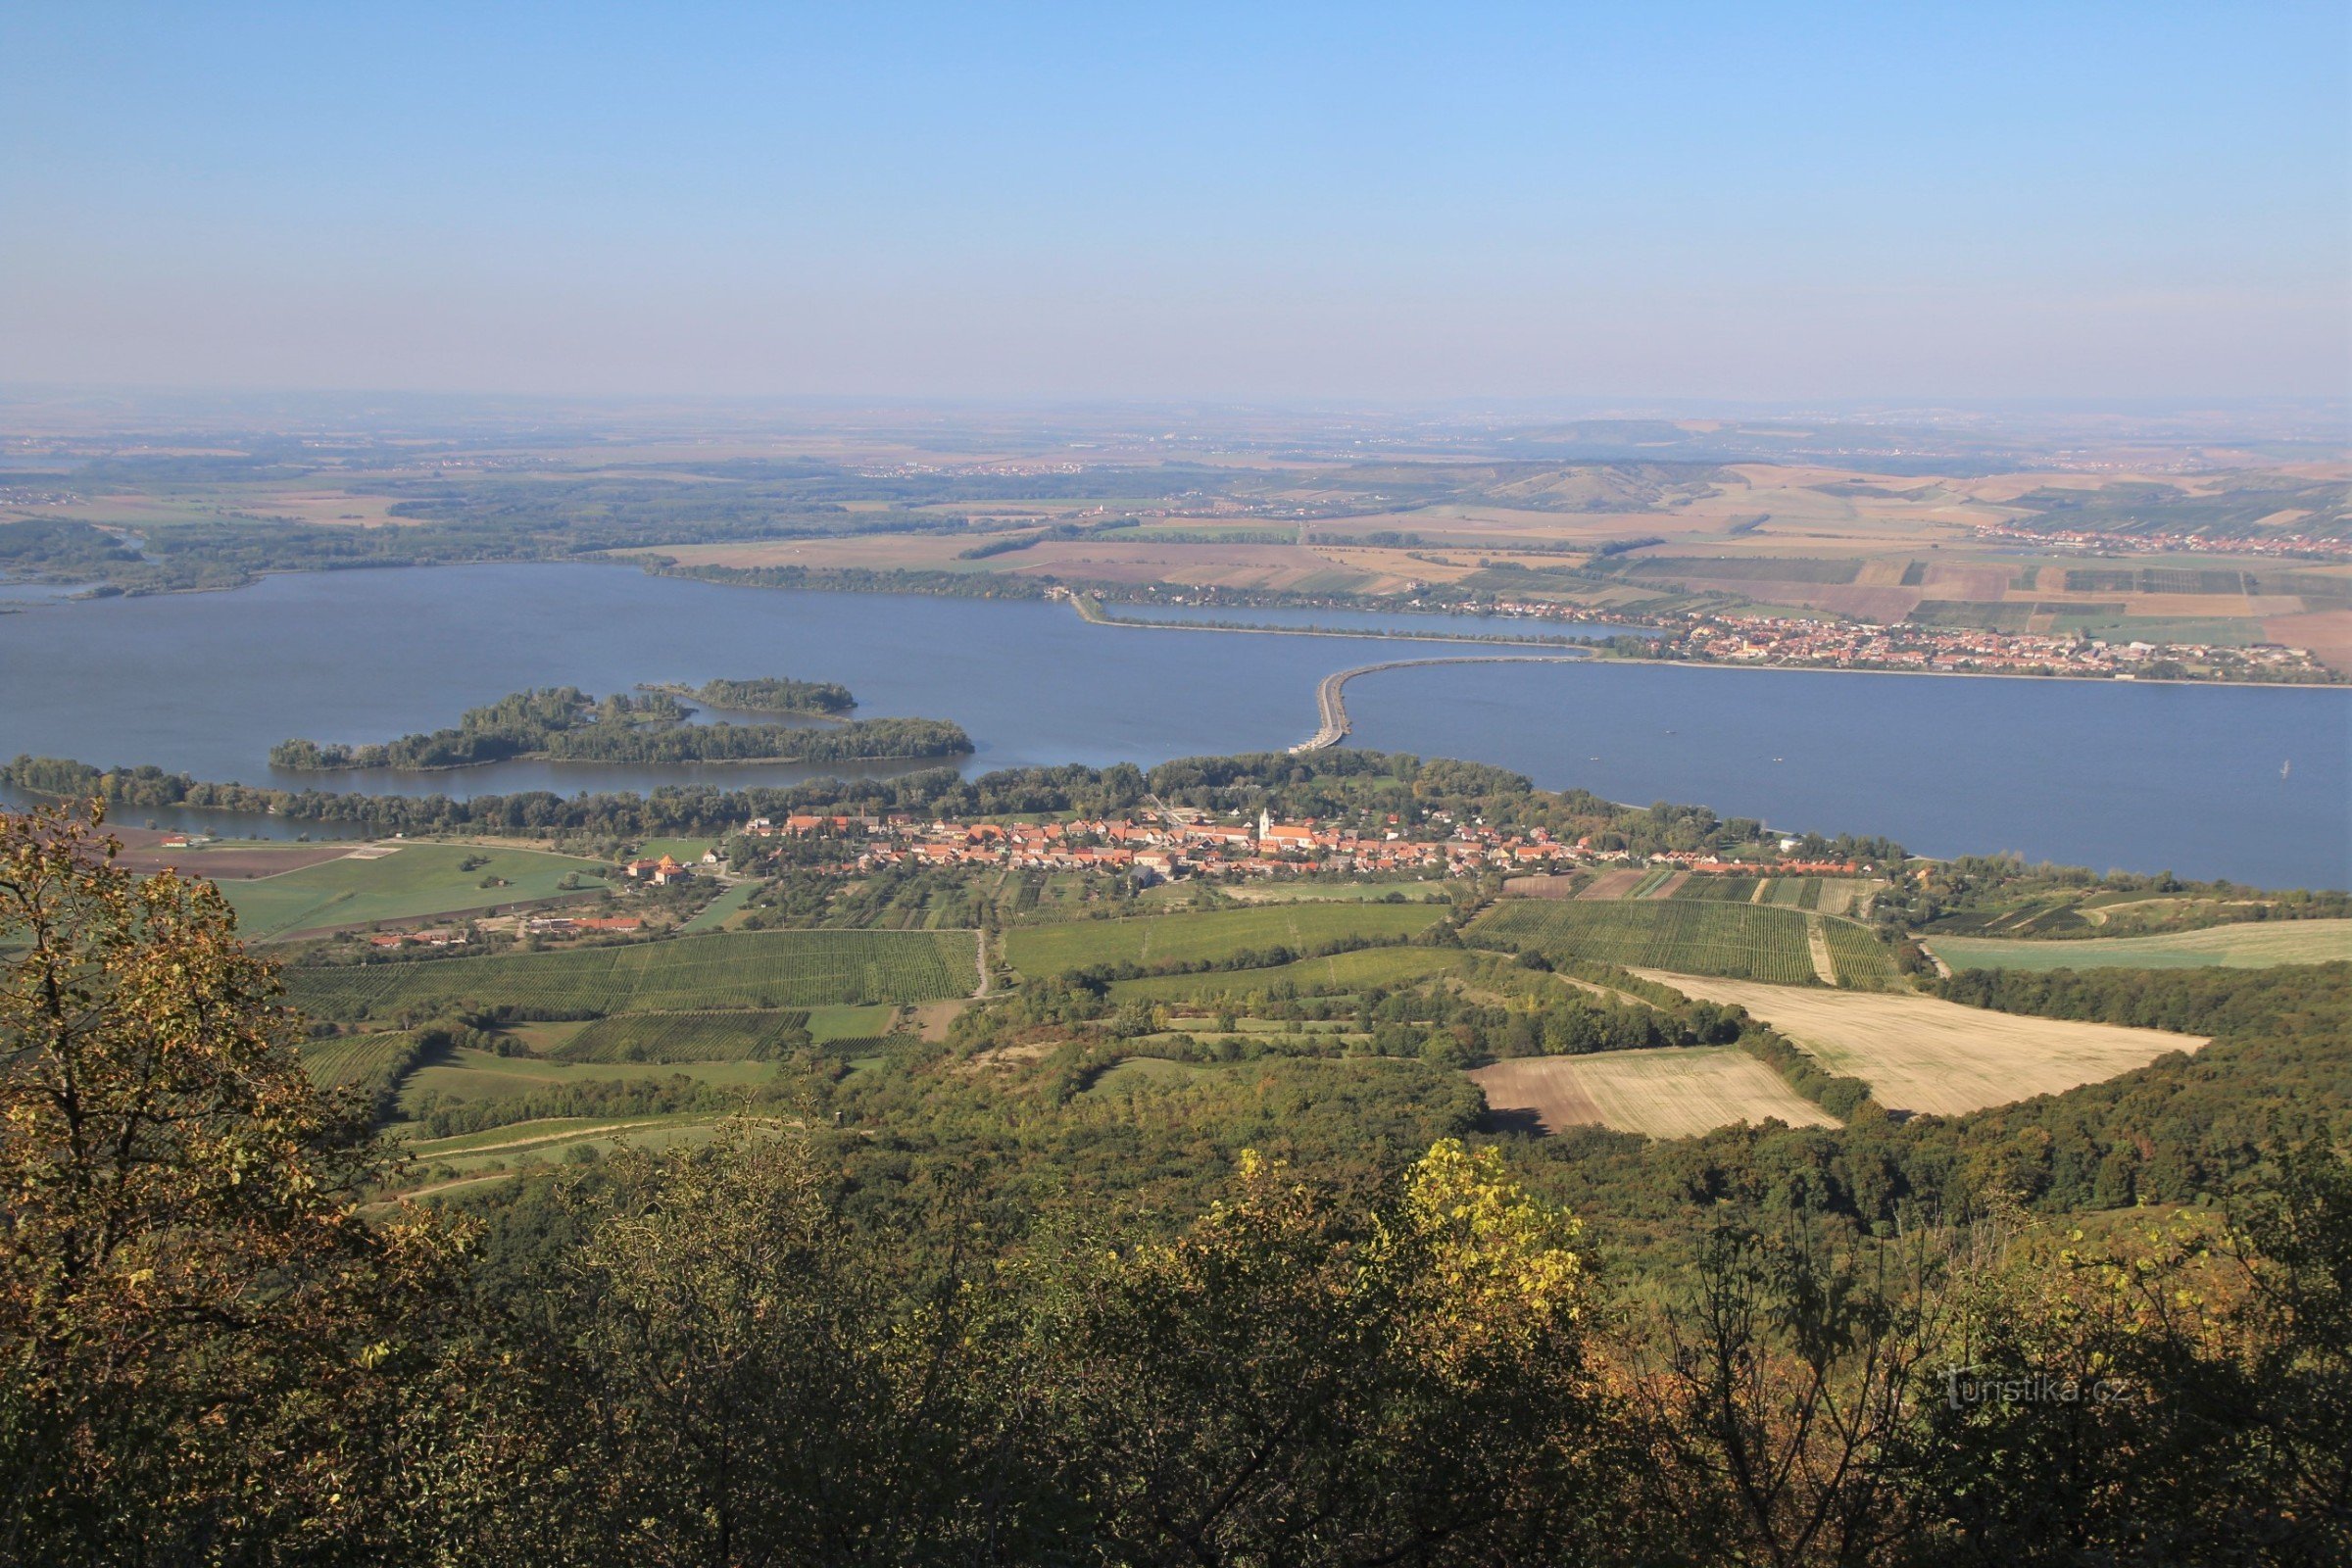 View from the top to the Dyje valley on the Novomlýn reservoirs, in the foreground is the village of Dolní Věstonice